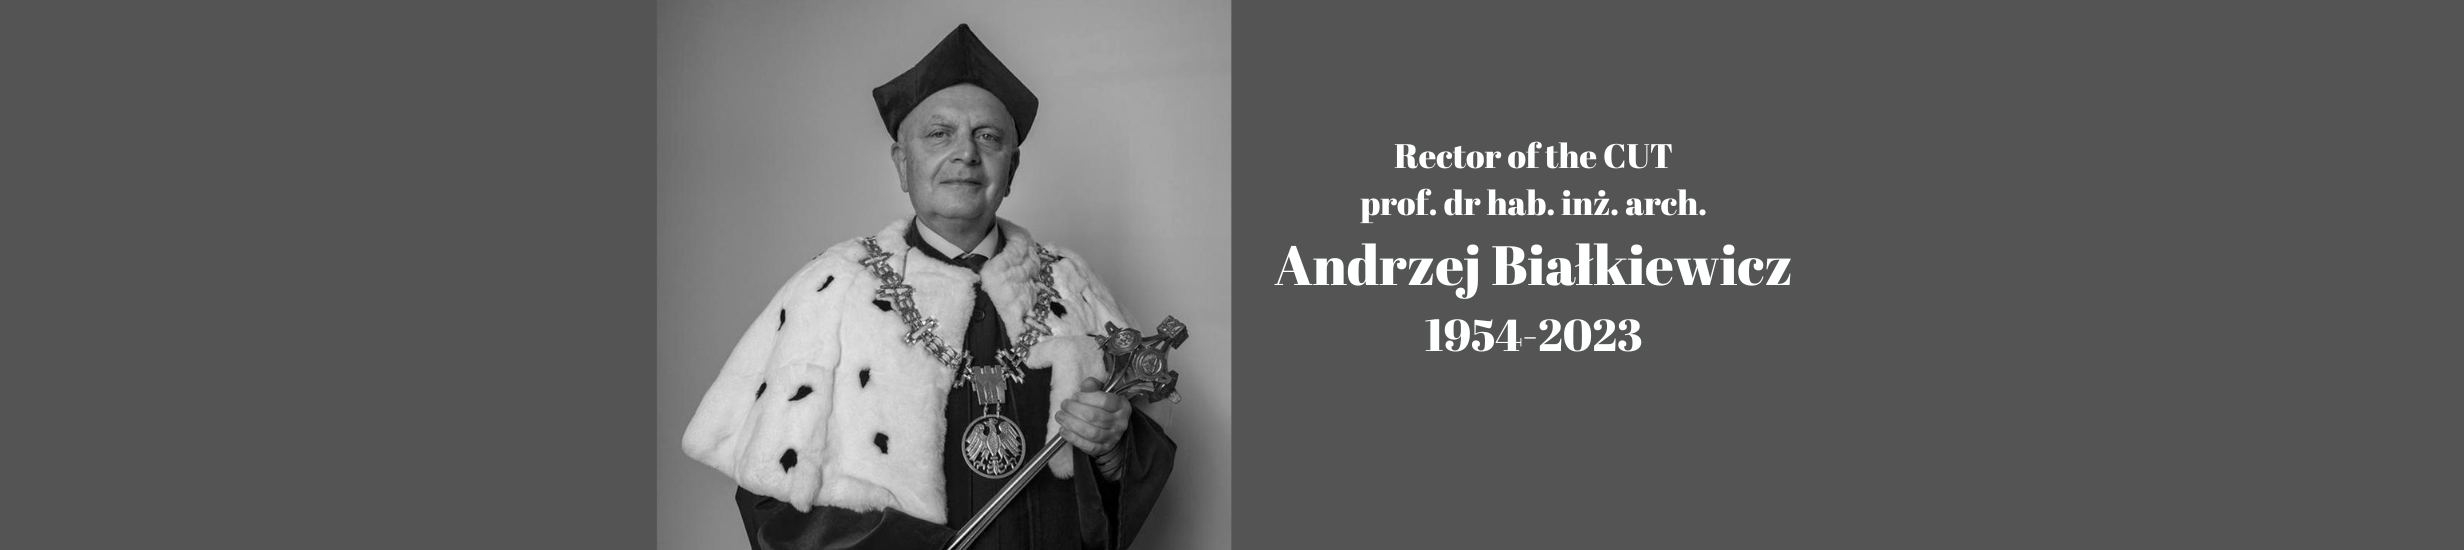 It is with deep regret that we announce the death of prof. dr hab. inż. arch. Andrzej Białkiewicz, Rector of the Cracow University of Technology